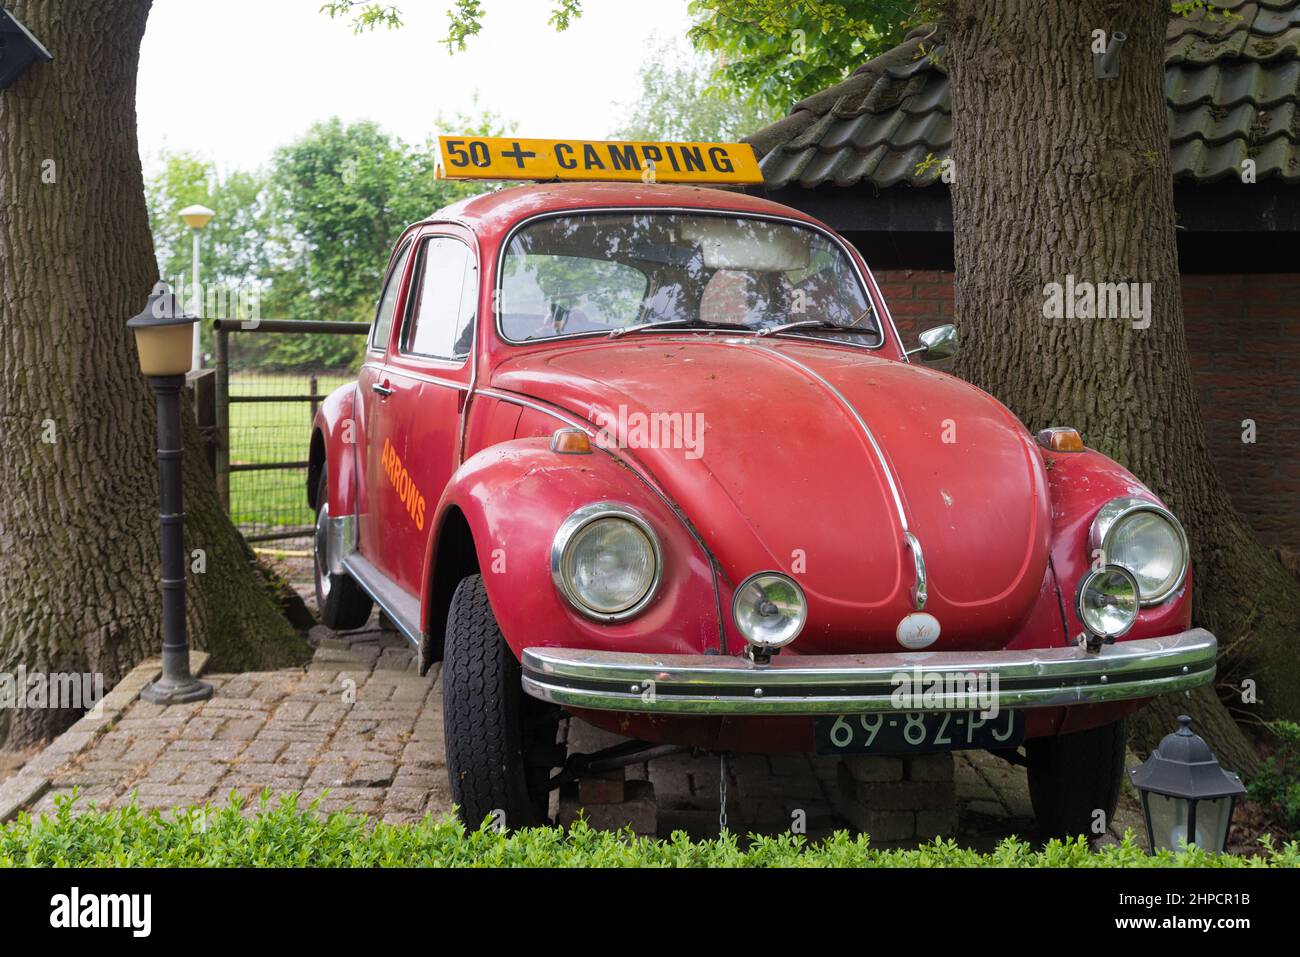 HAARLE, NETHERLANDS - MAY 10, 2020: Red oldtimer VW beetle car as a signboard for a 50+ camping Stock Photo